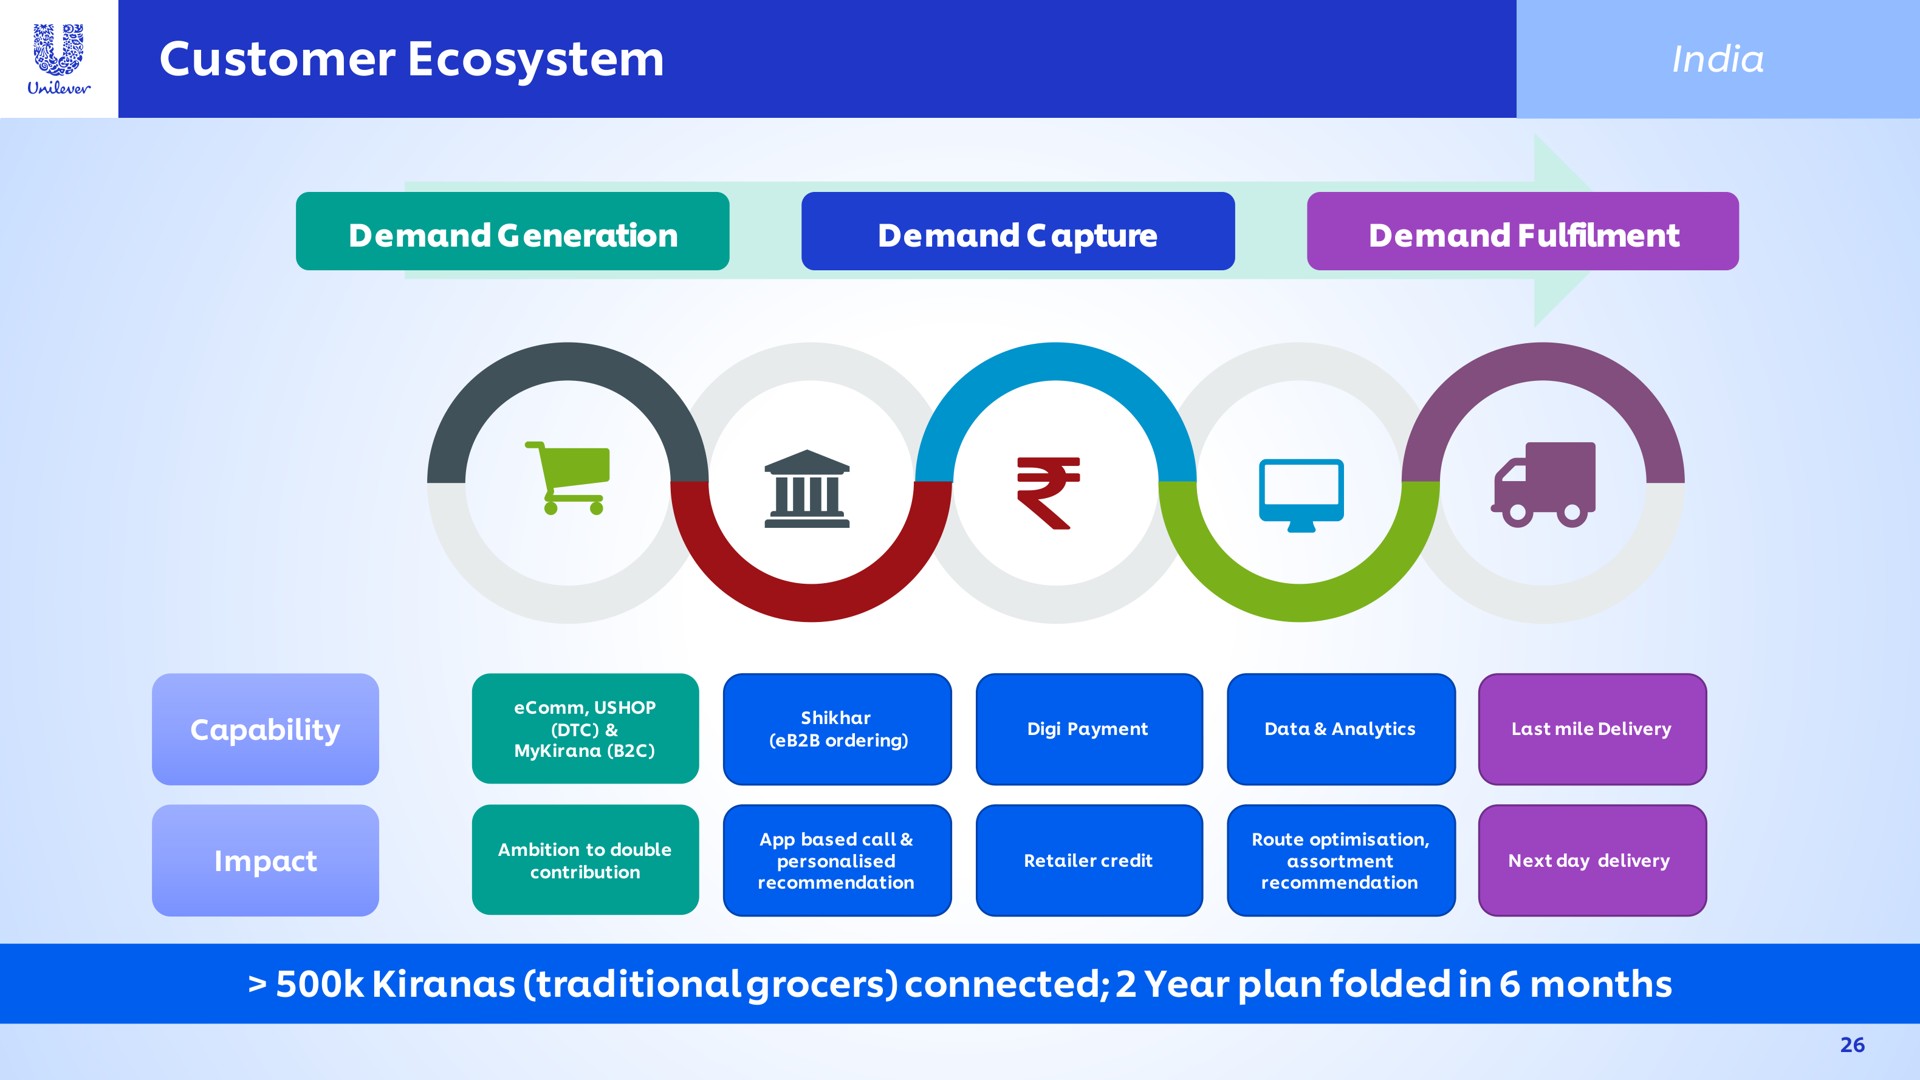 customer ecosystem traditional grocers connected year plan folded in months | Unilever